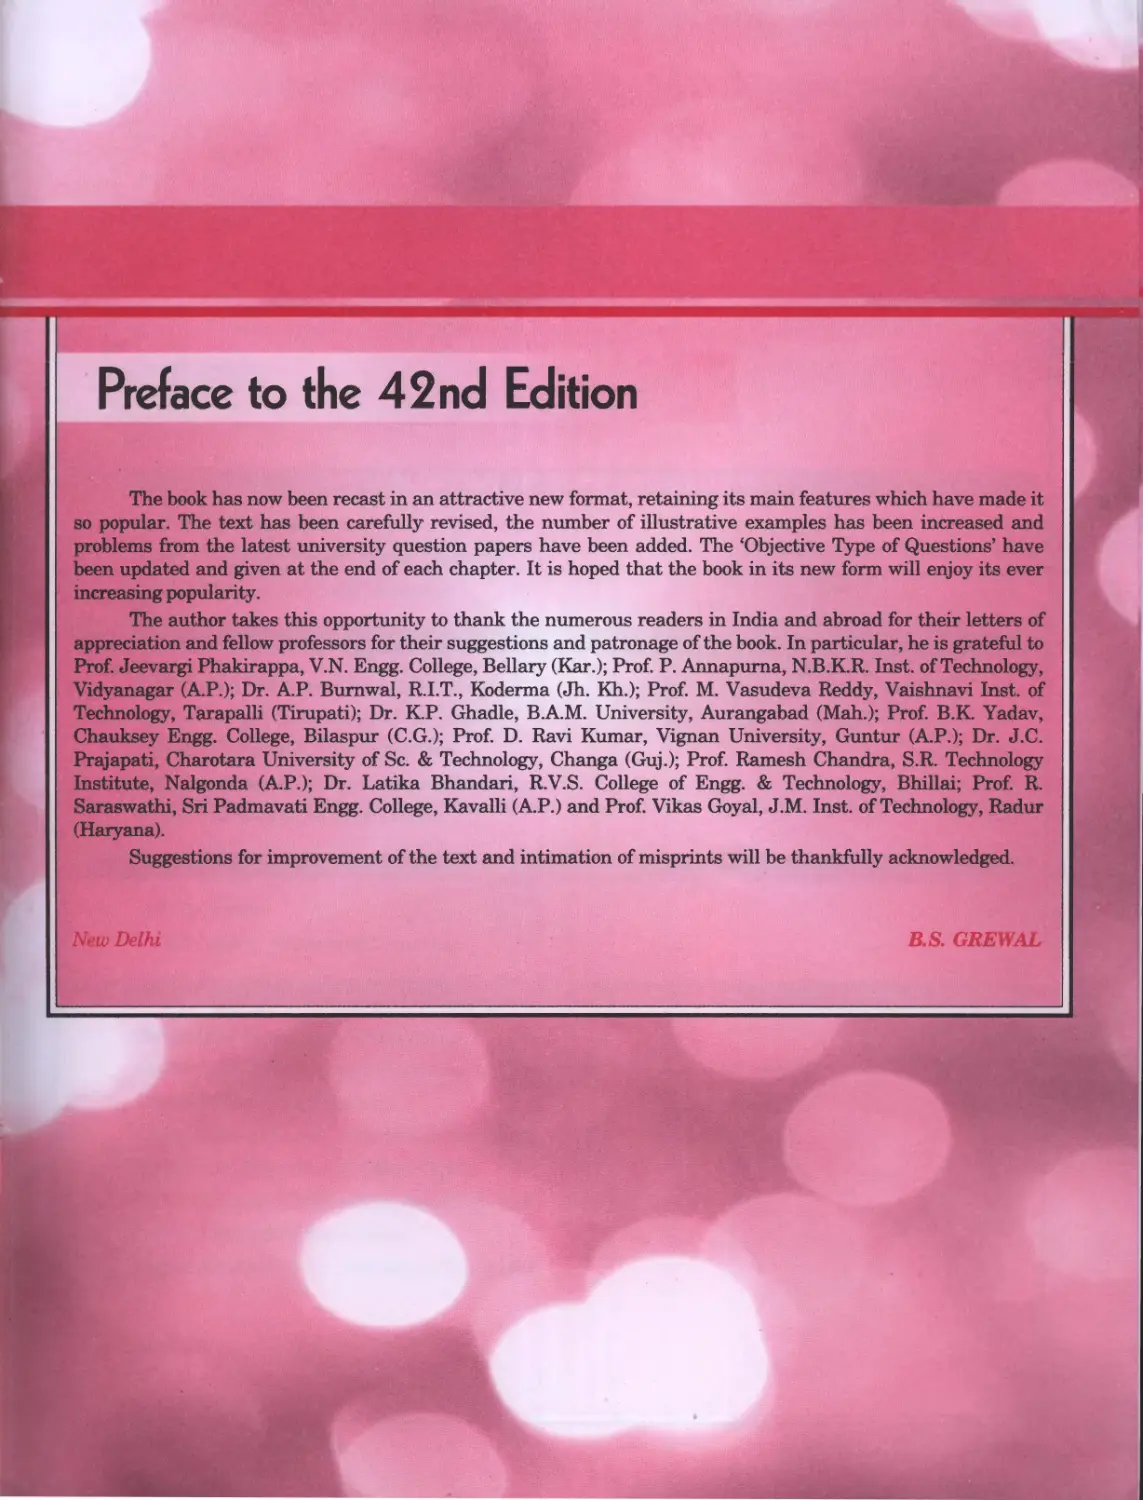 Preface to the 42nd Edition